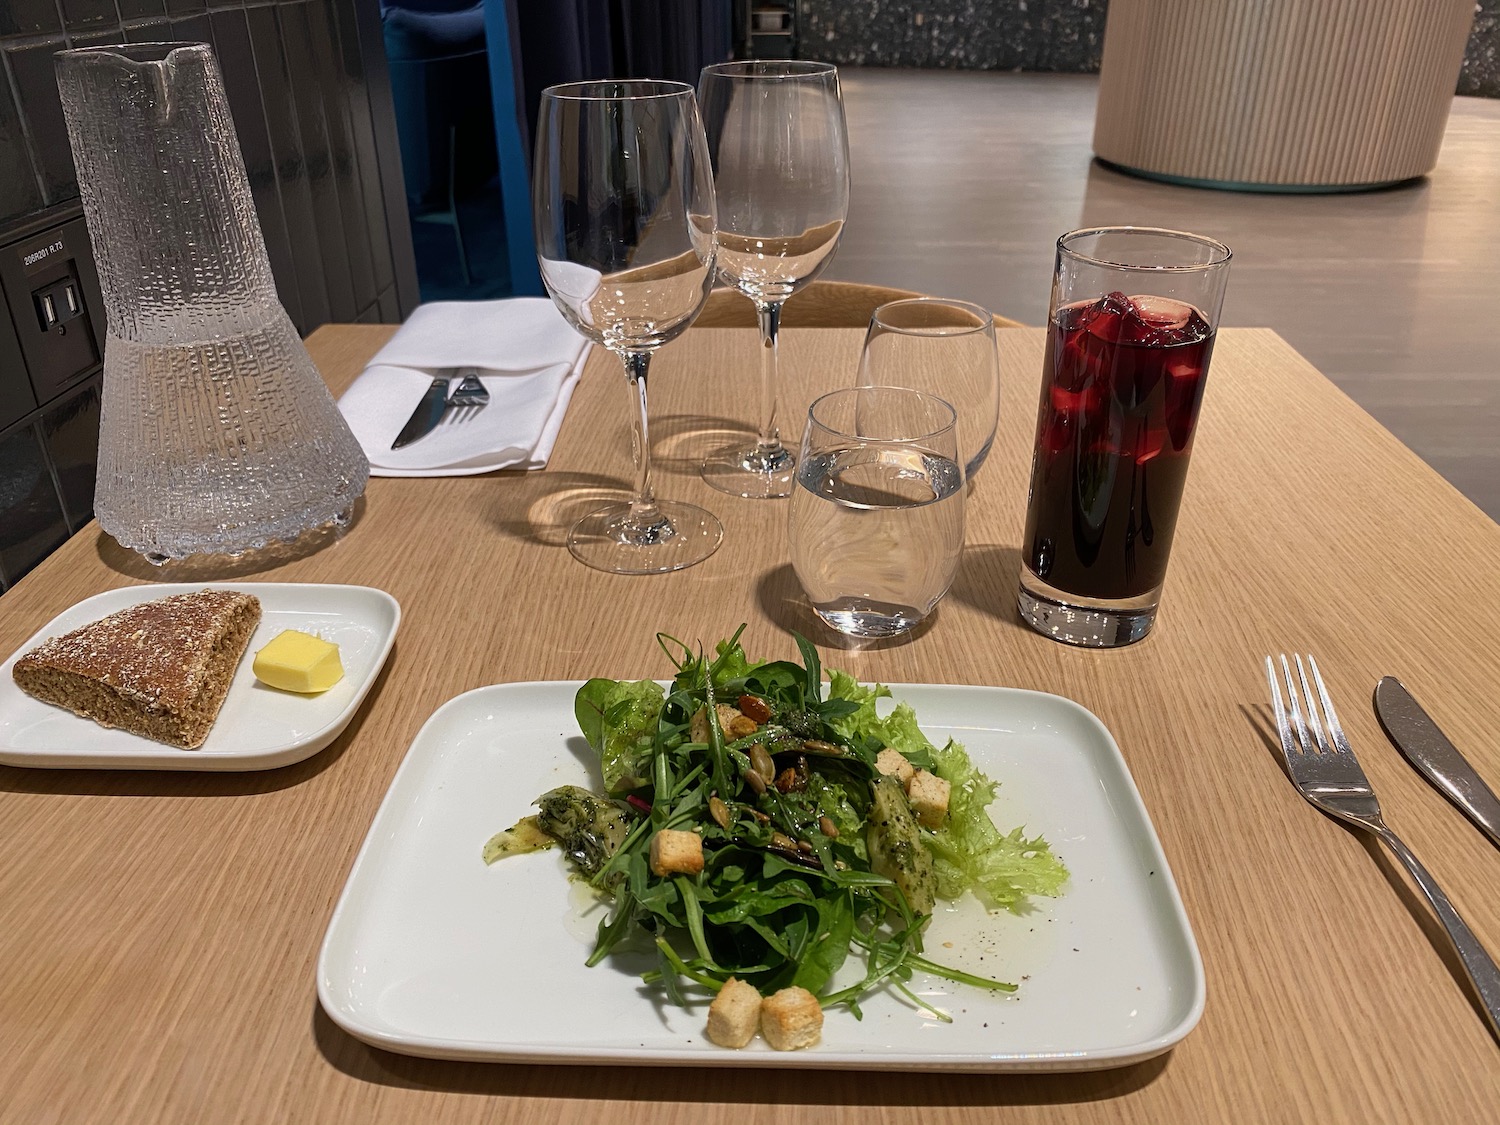 a plate of salad and glasses on a table